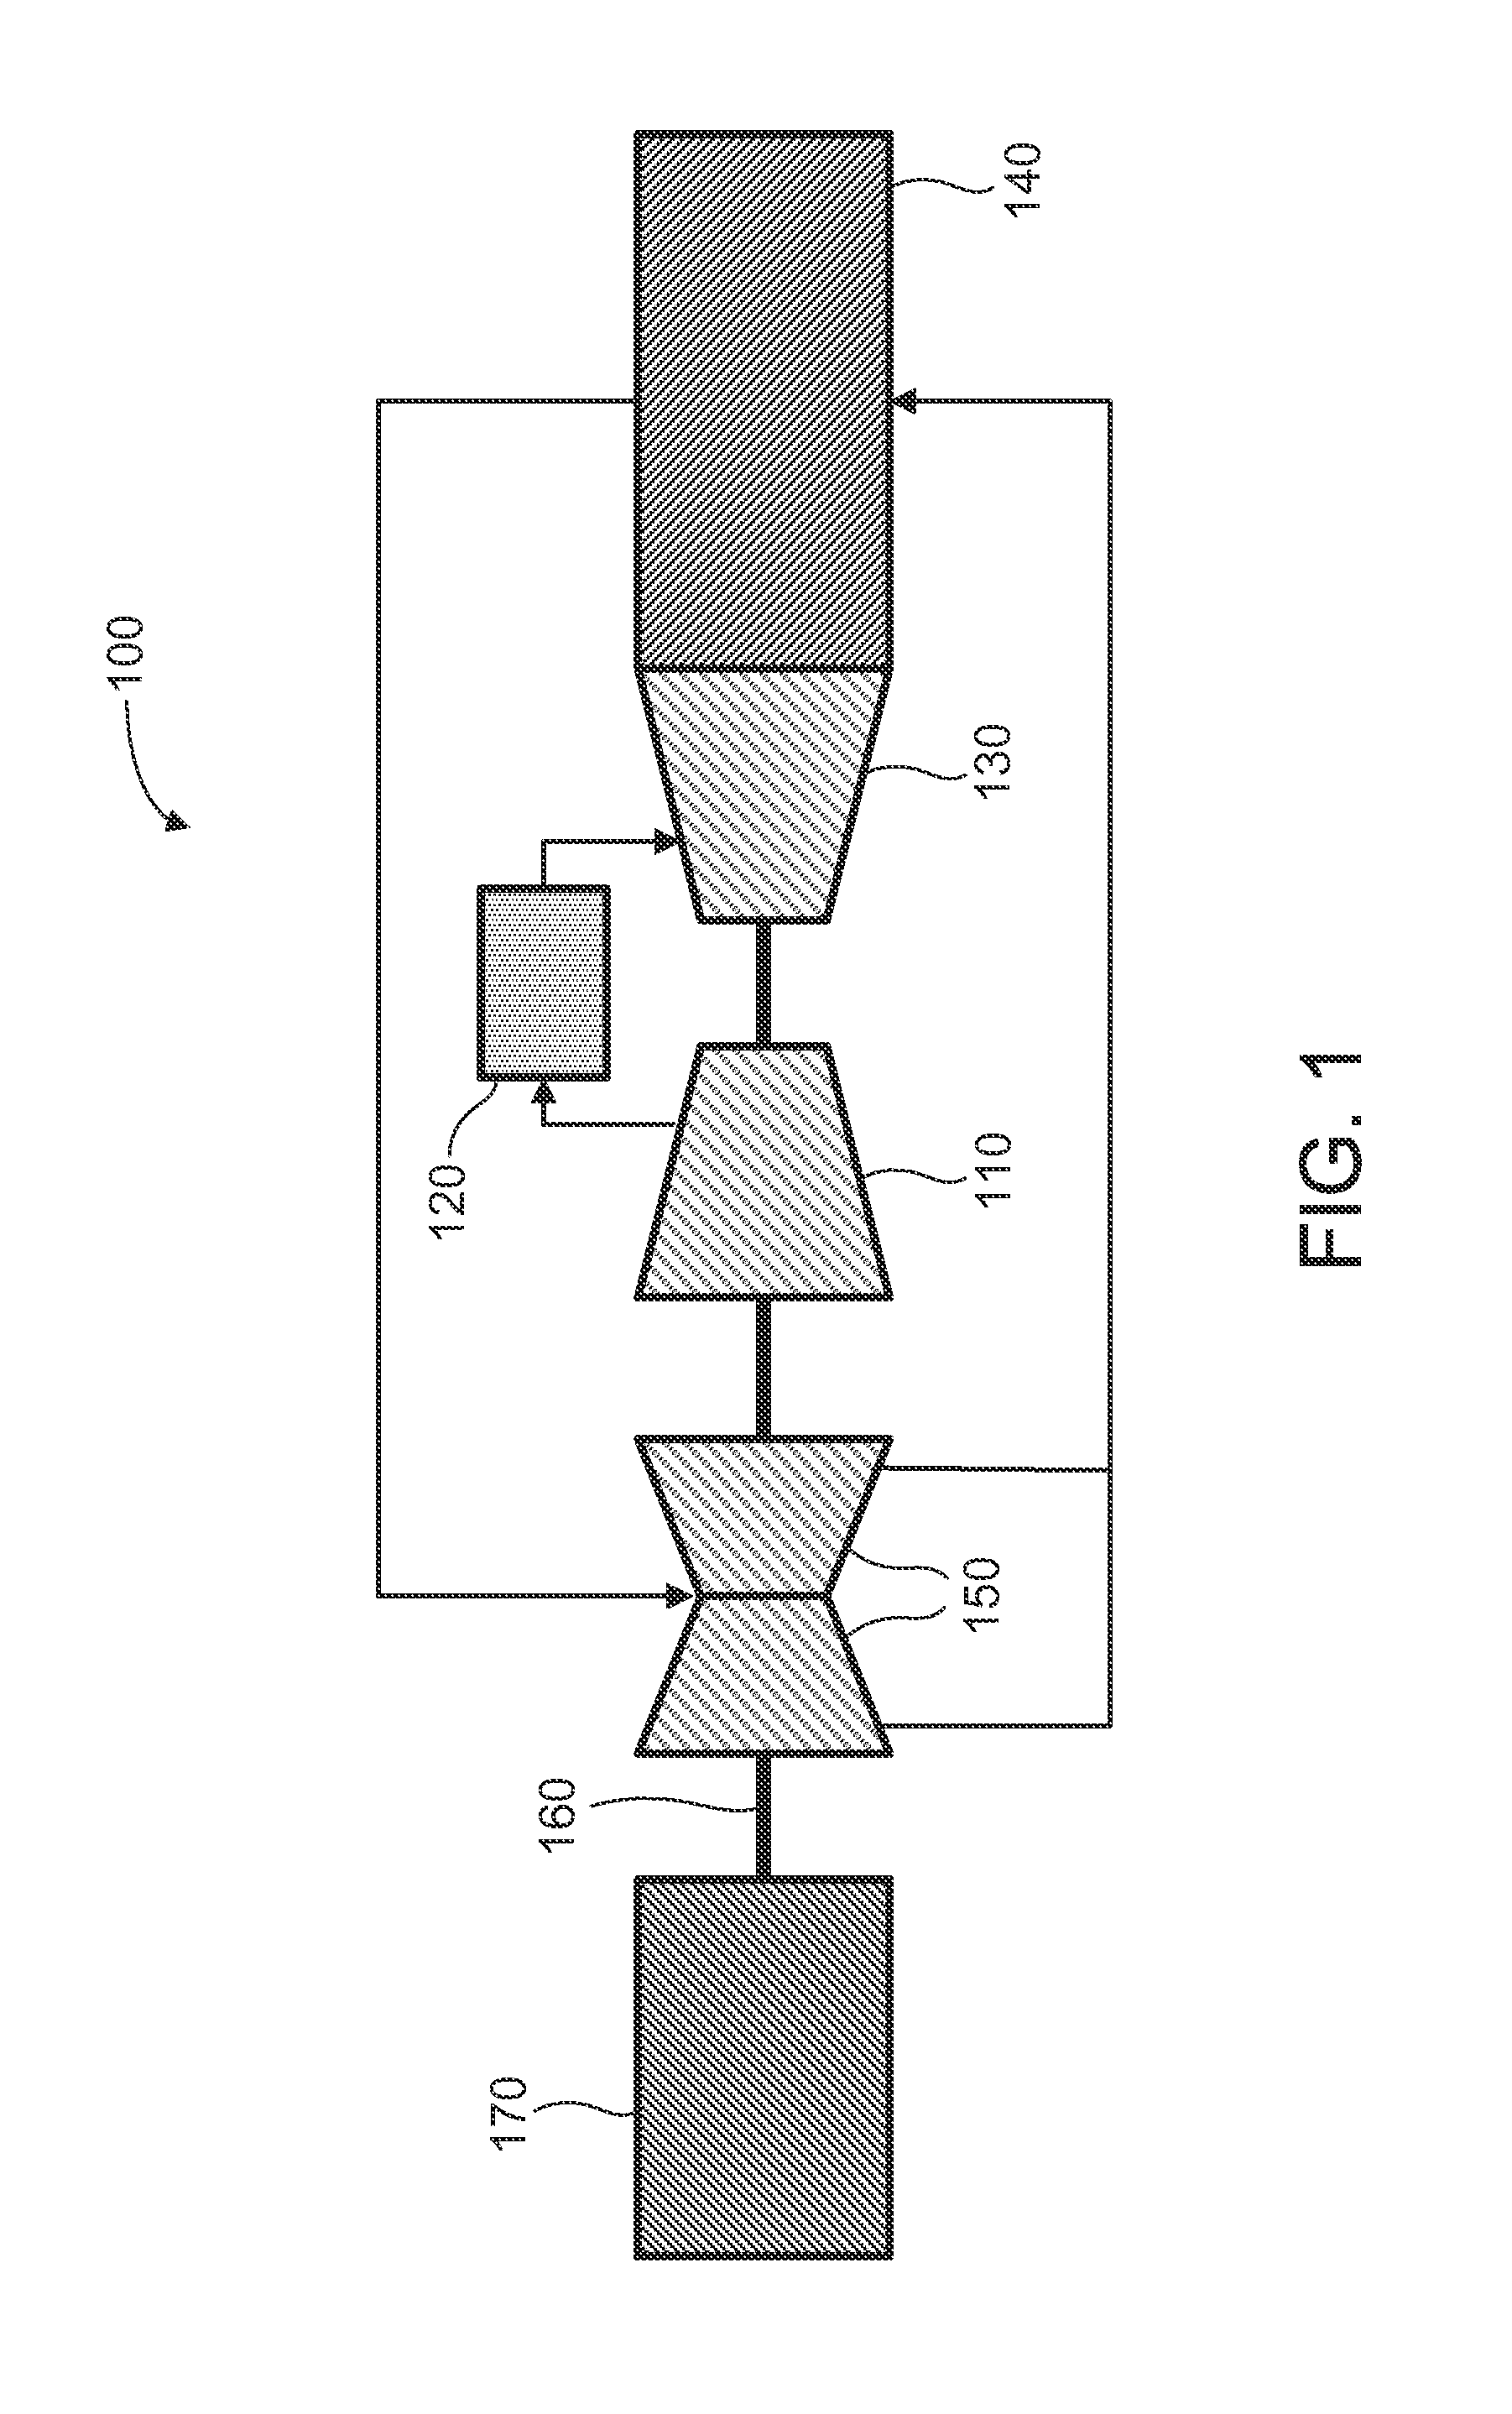 Heat pipe temperature management system for a turbomachine